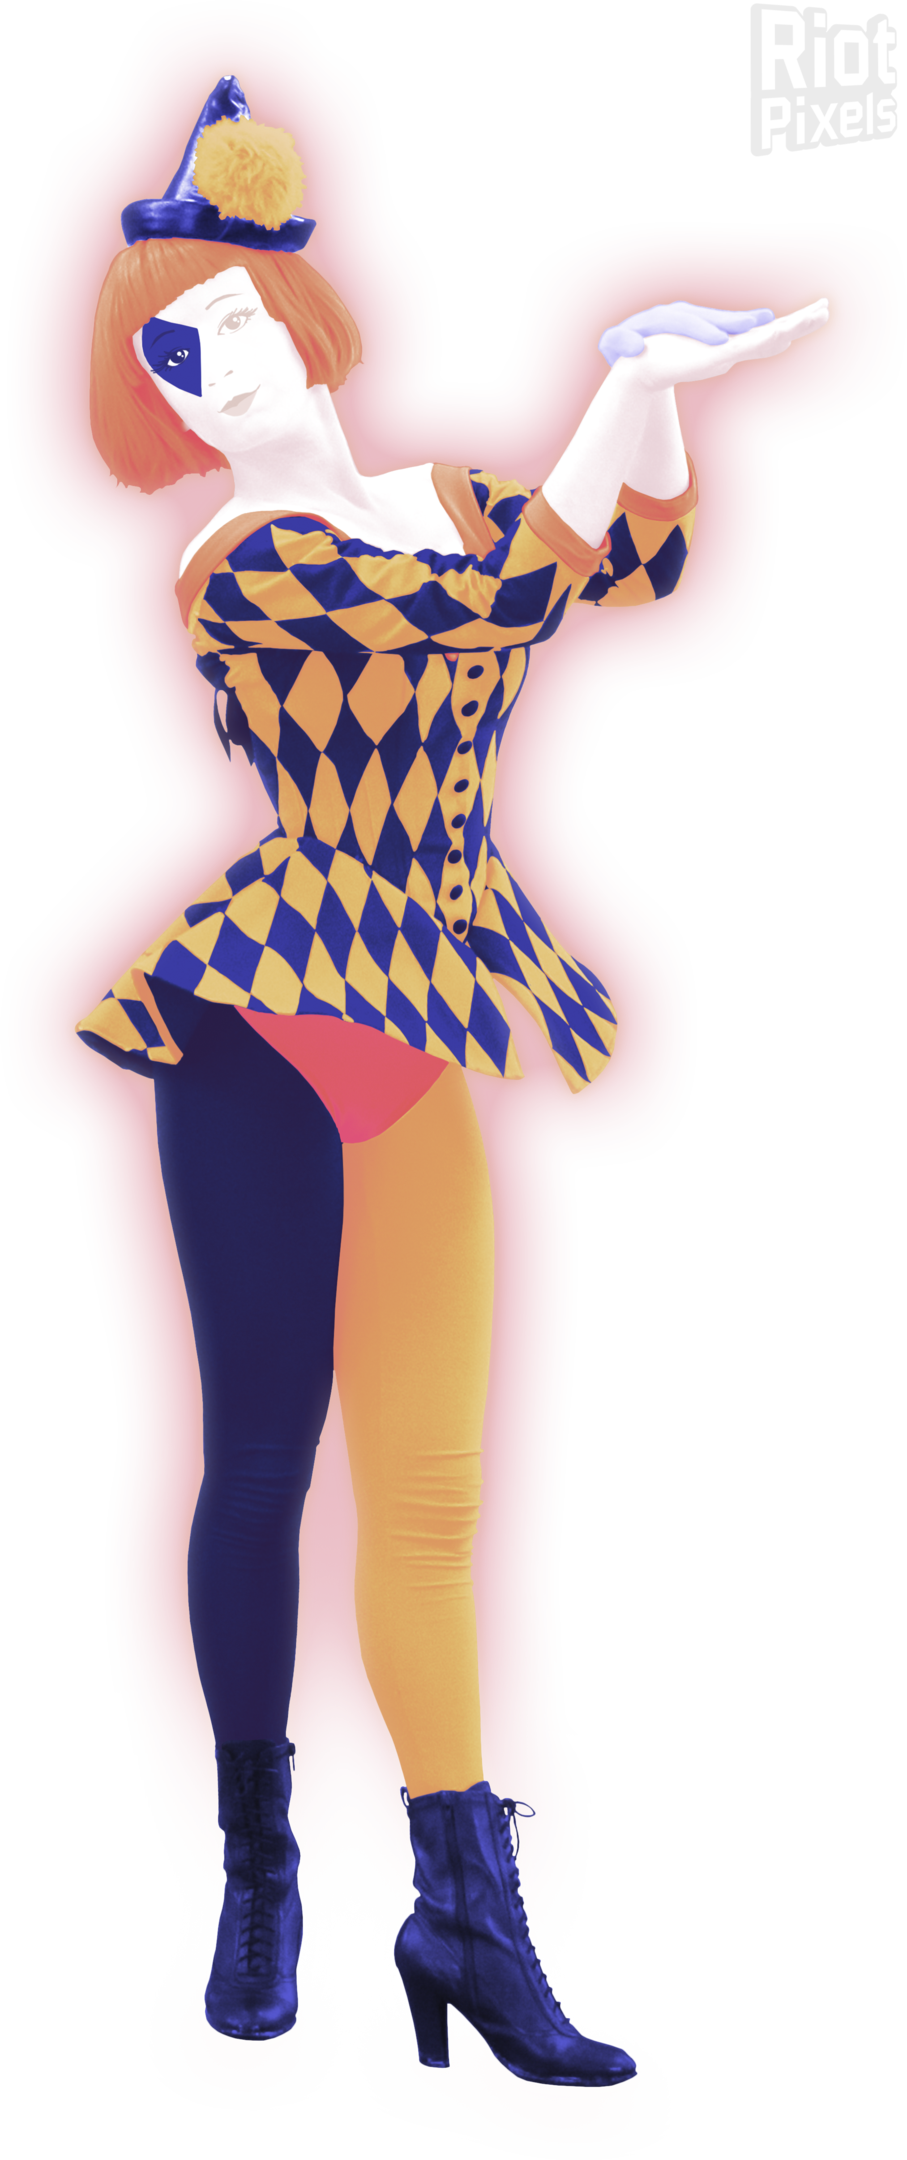 I Kissed A Girl Just Dance Wiki Fandom Powered By Wikia - Just Dance (907x2160)